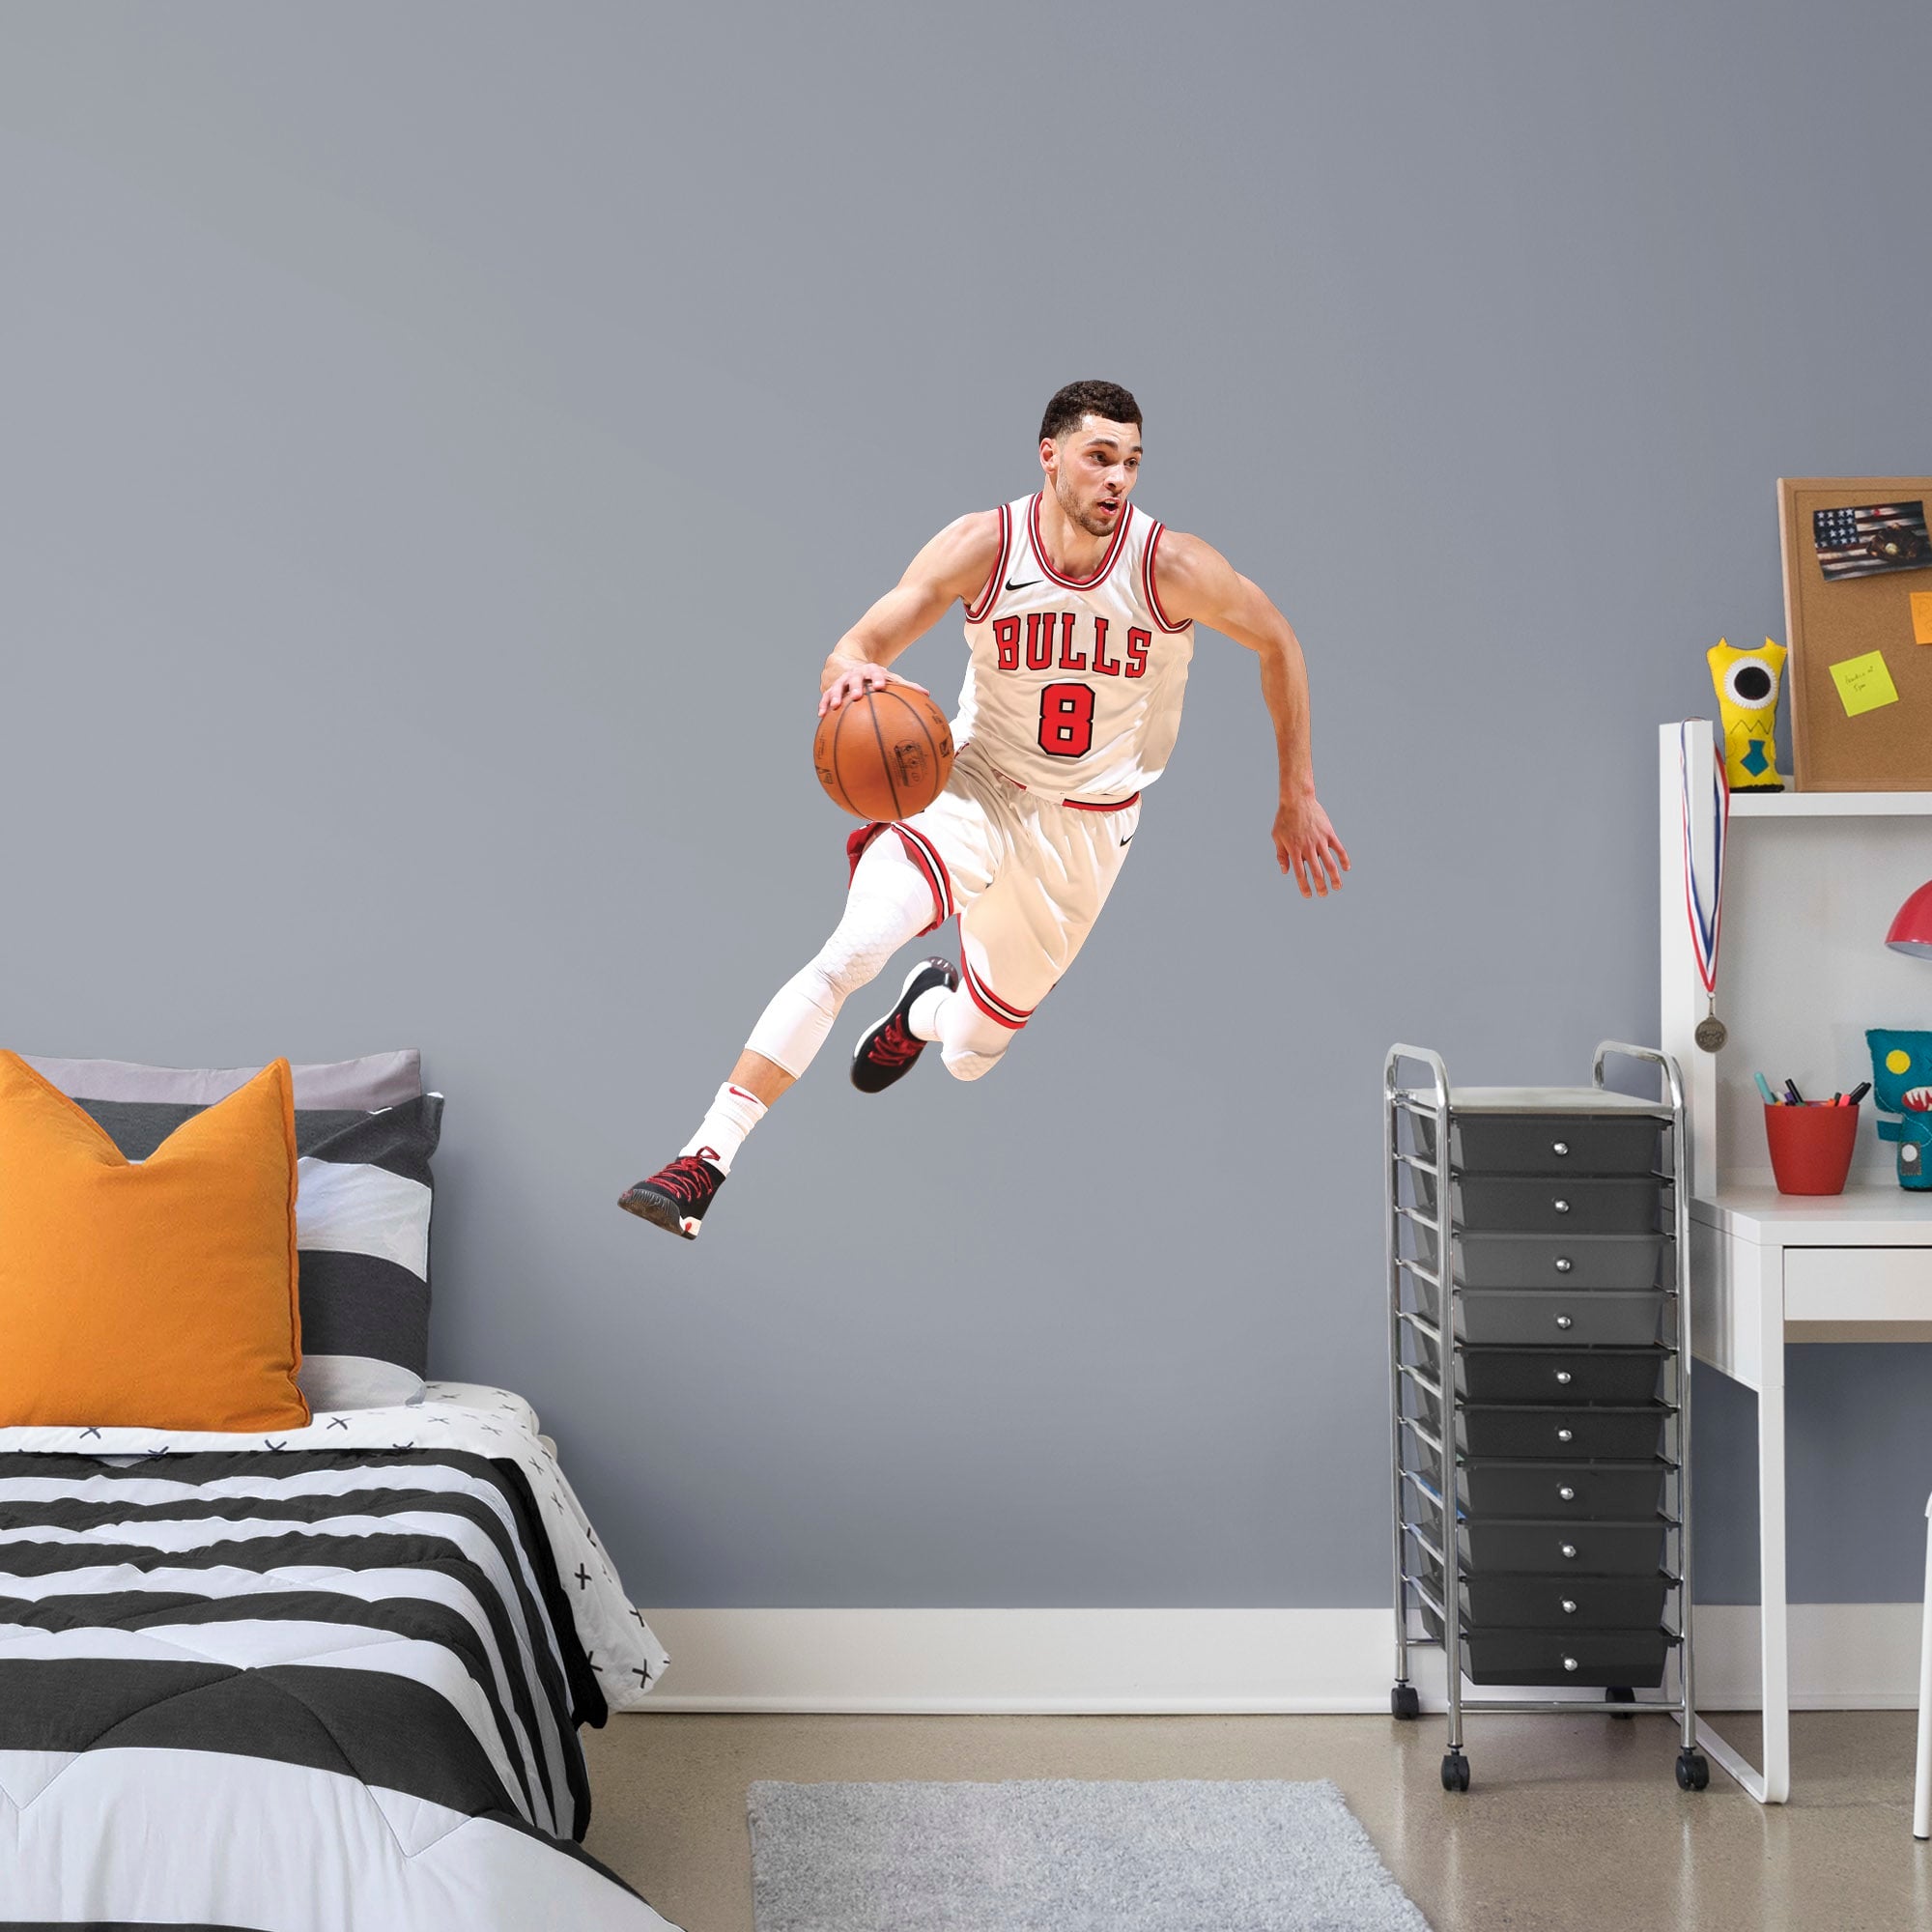 Zach LaVine for Chicago Bulls - Officially Licensed NBA Removable Wall Decal Giant Athlete + 2 Decals (30"W x 51"H) by Fathead |